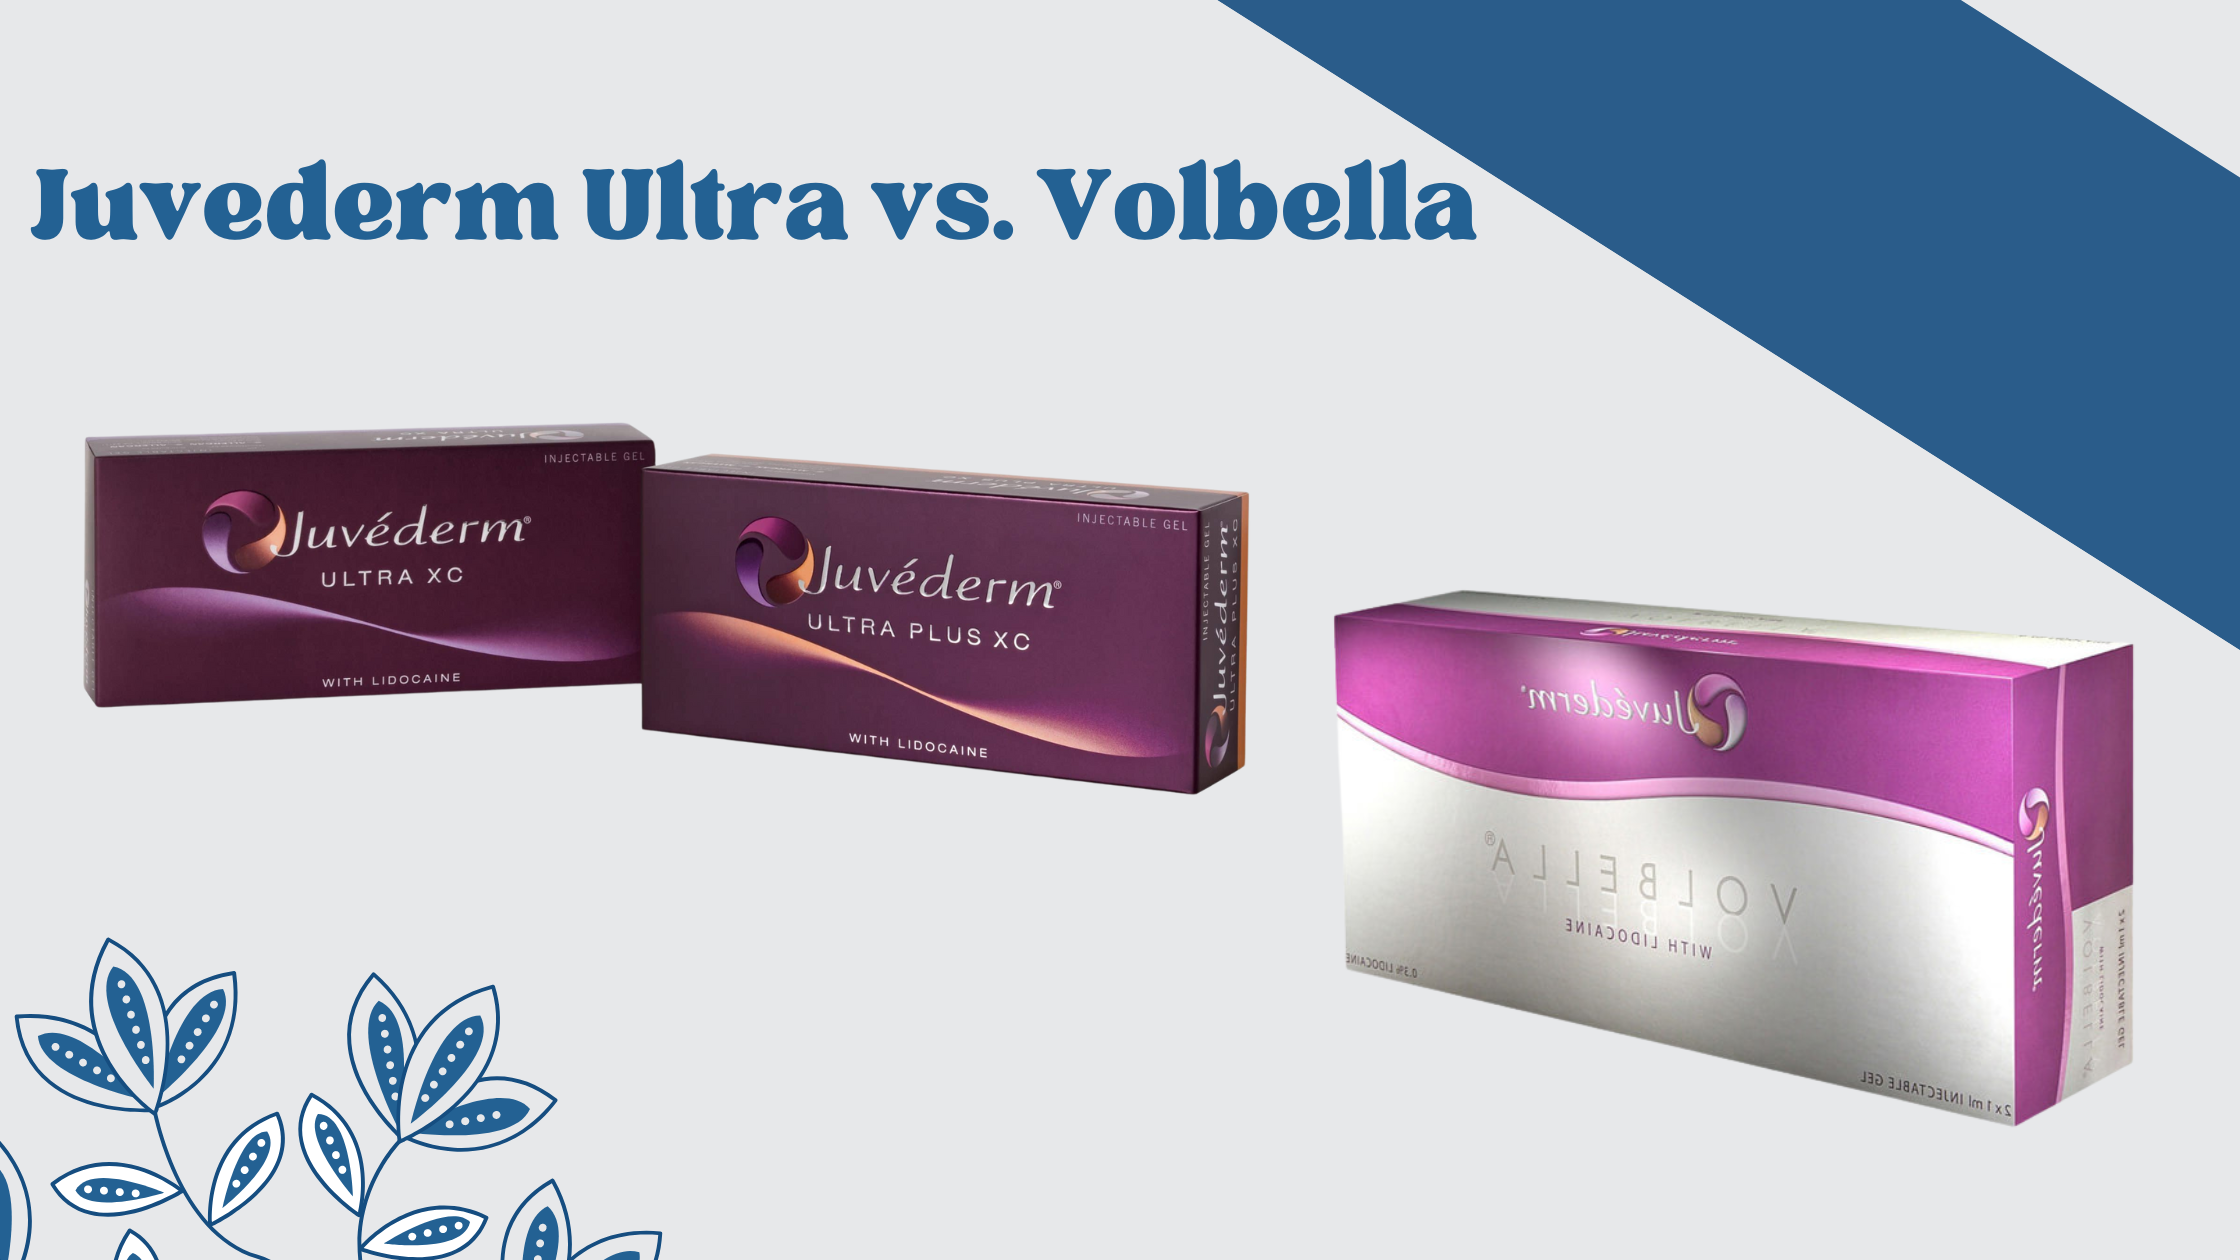 Juvederm Ultra vs. Volbella: Which Gives a Picture-Perfect Pout?